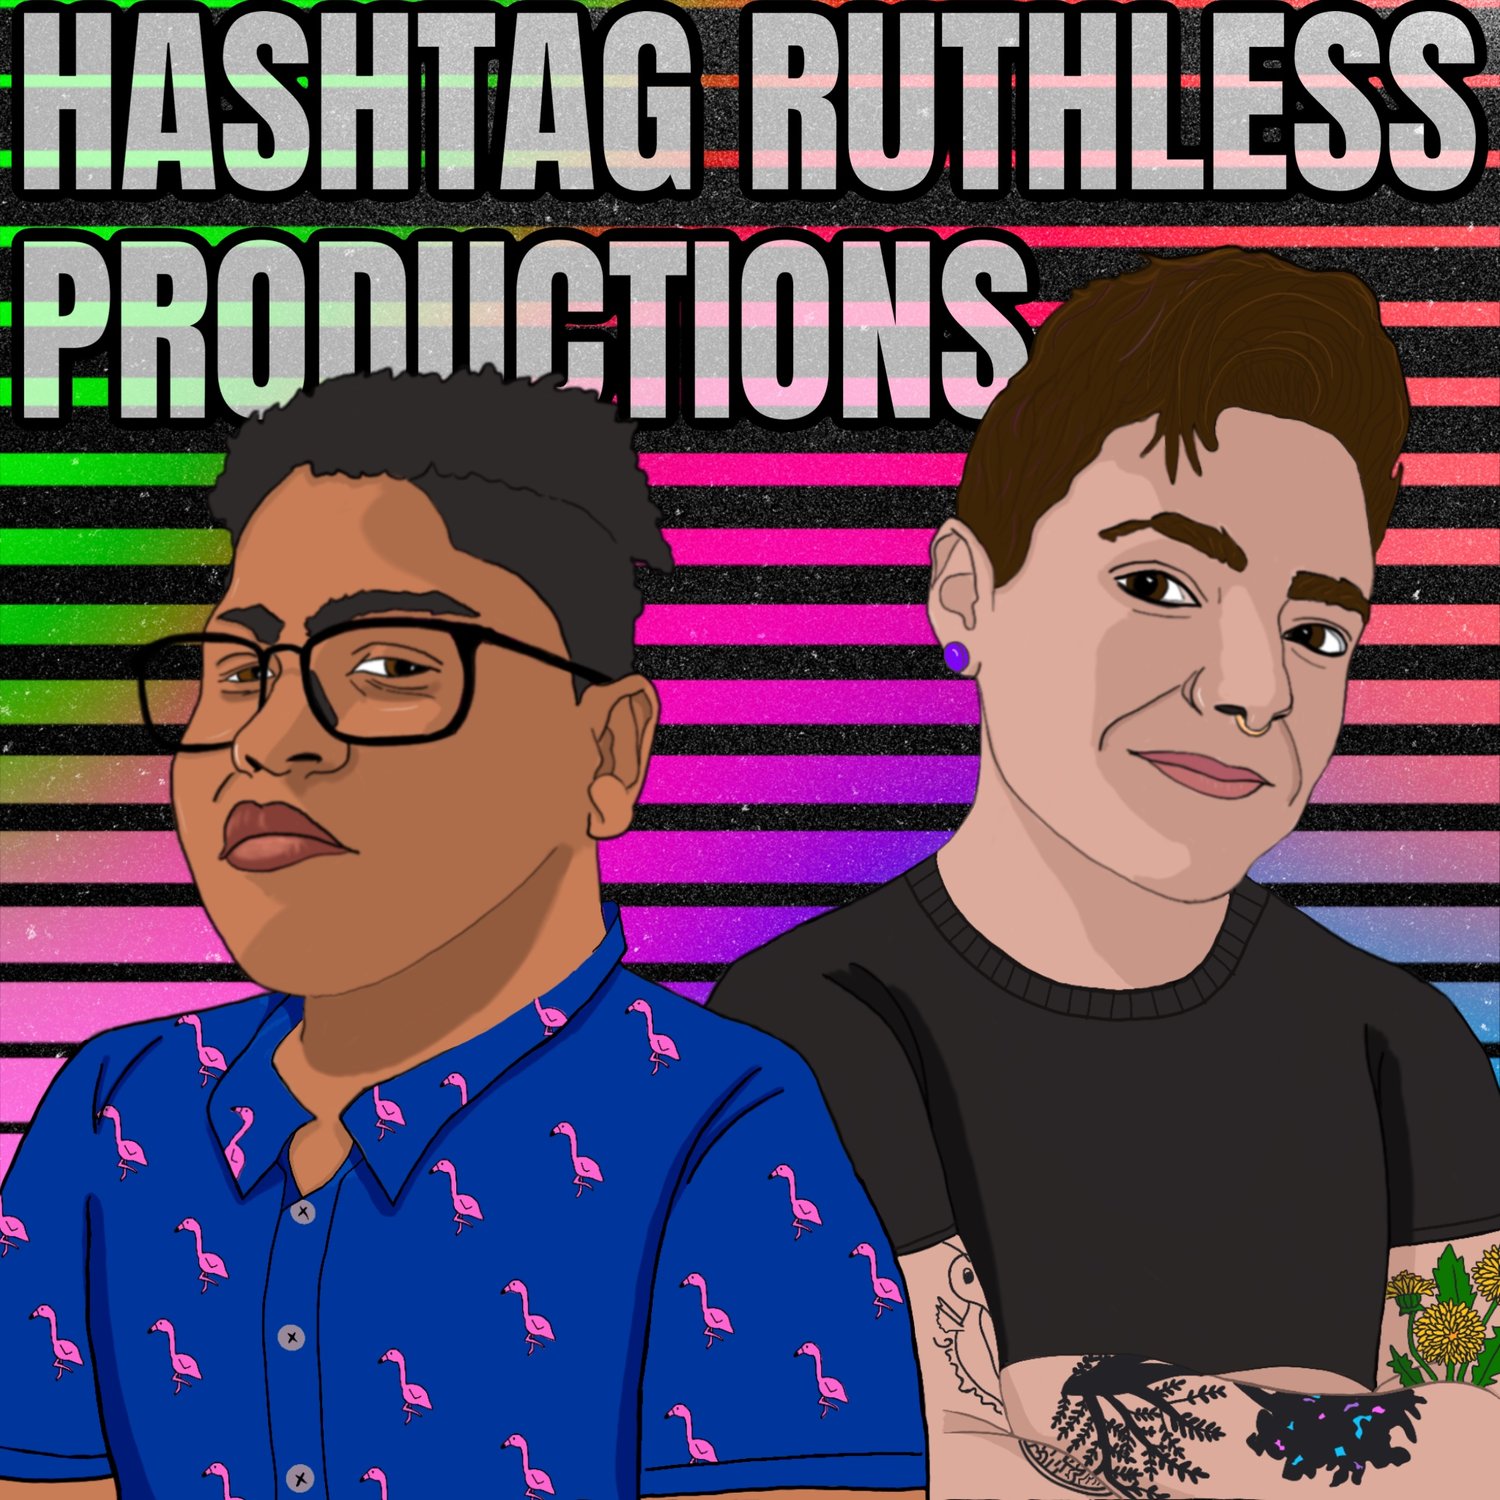 Hashtag Ruthless Productions